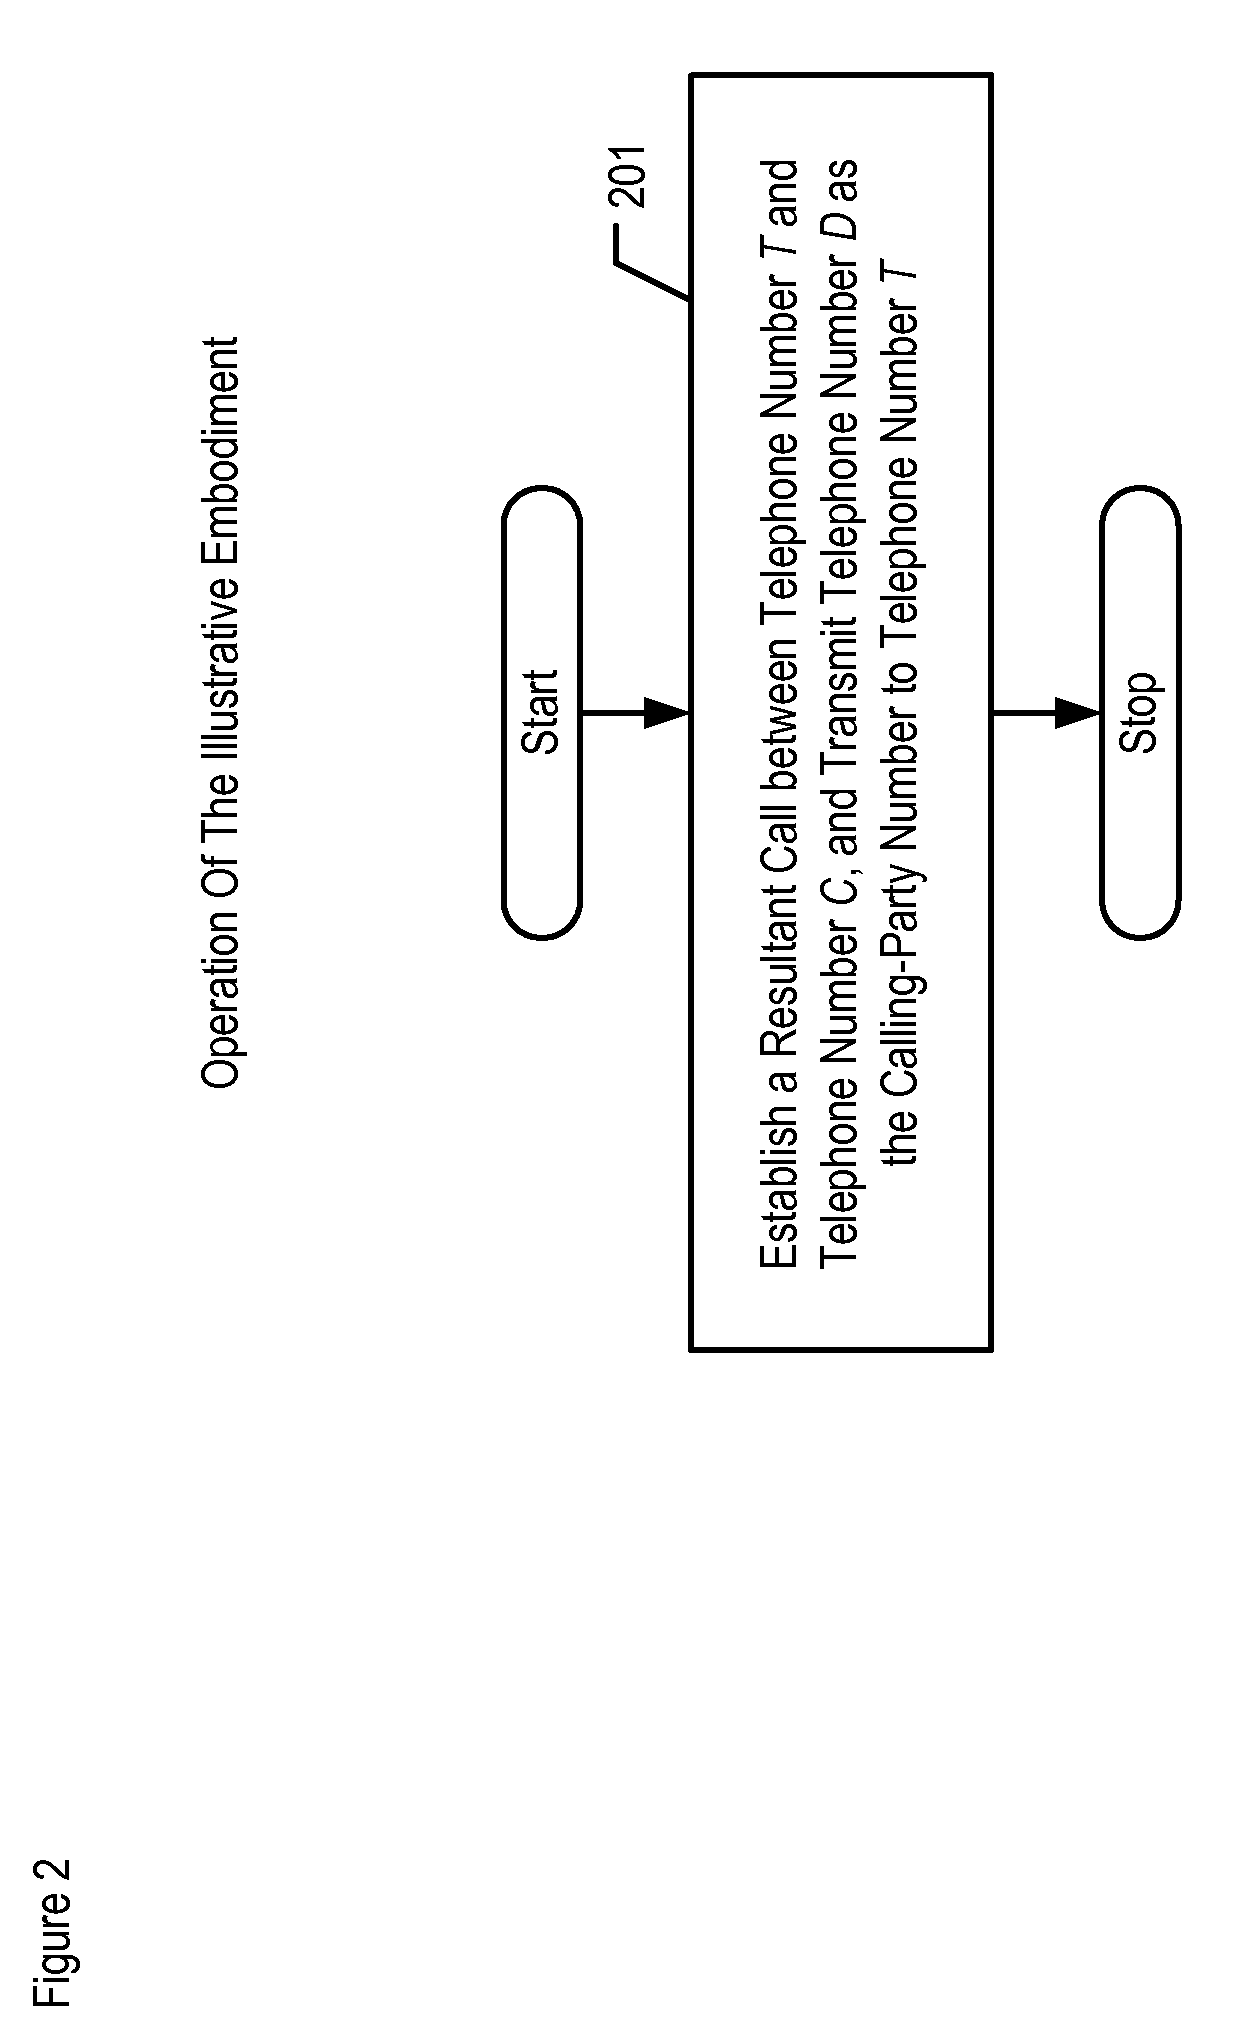 Private-branch exchange that provides outgoing calling for an off-premises terminal in the presence of a third-party application